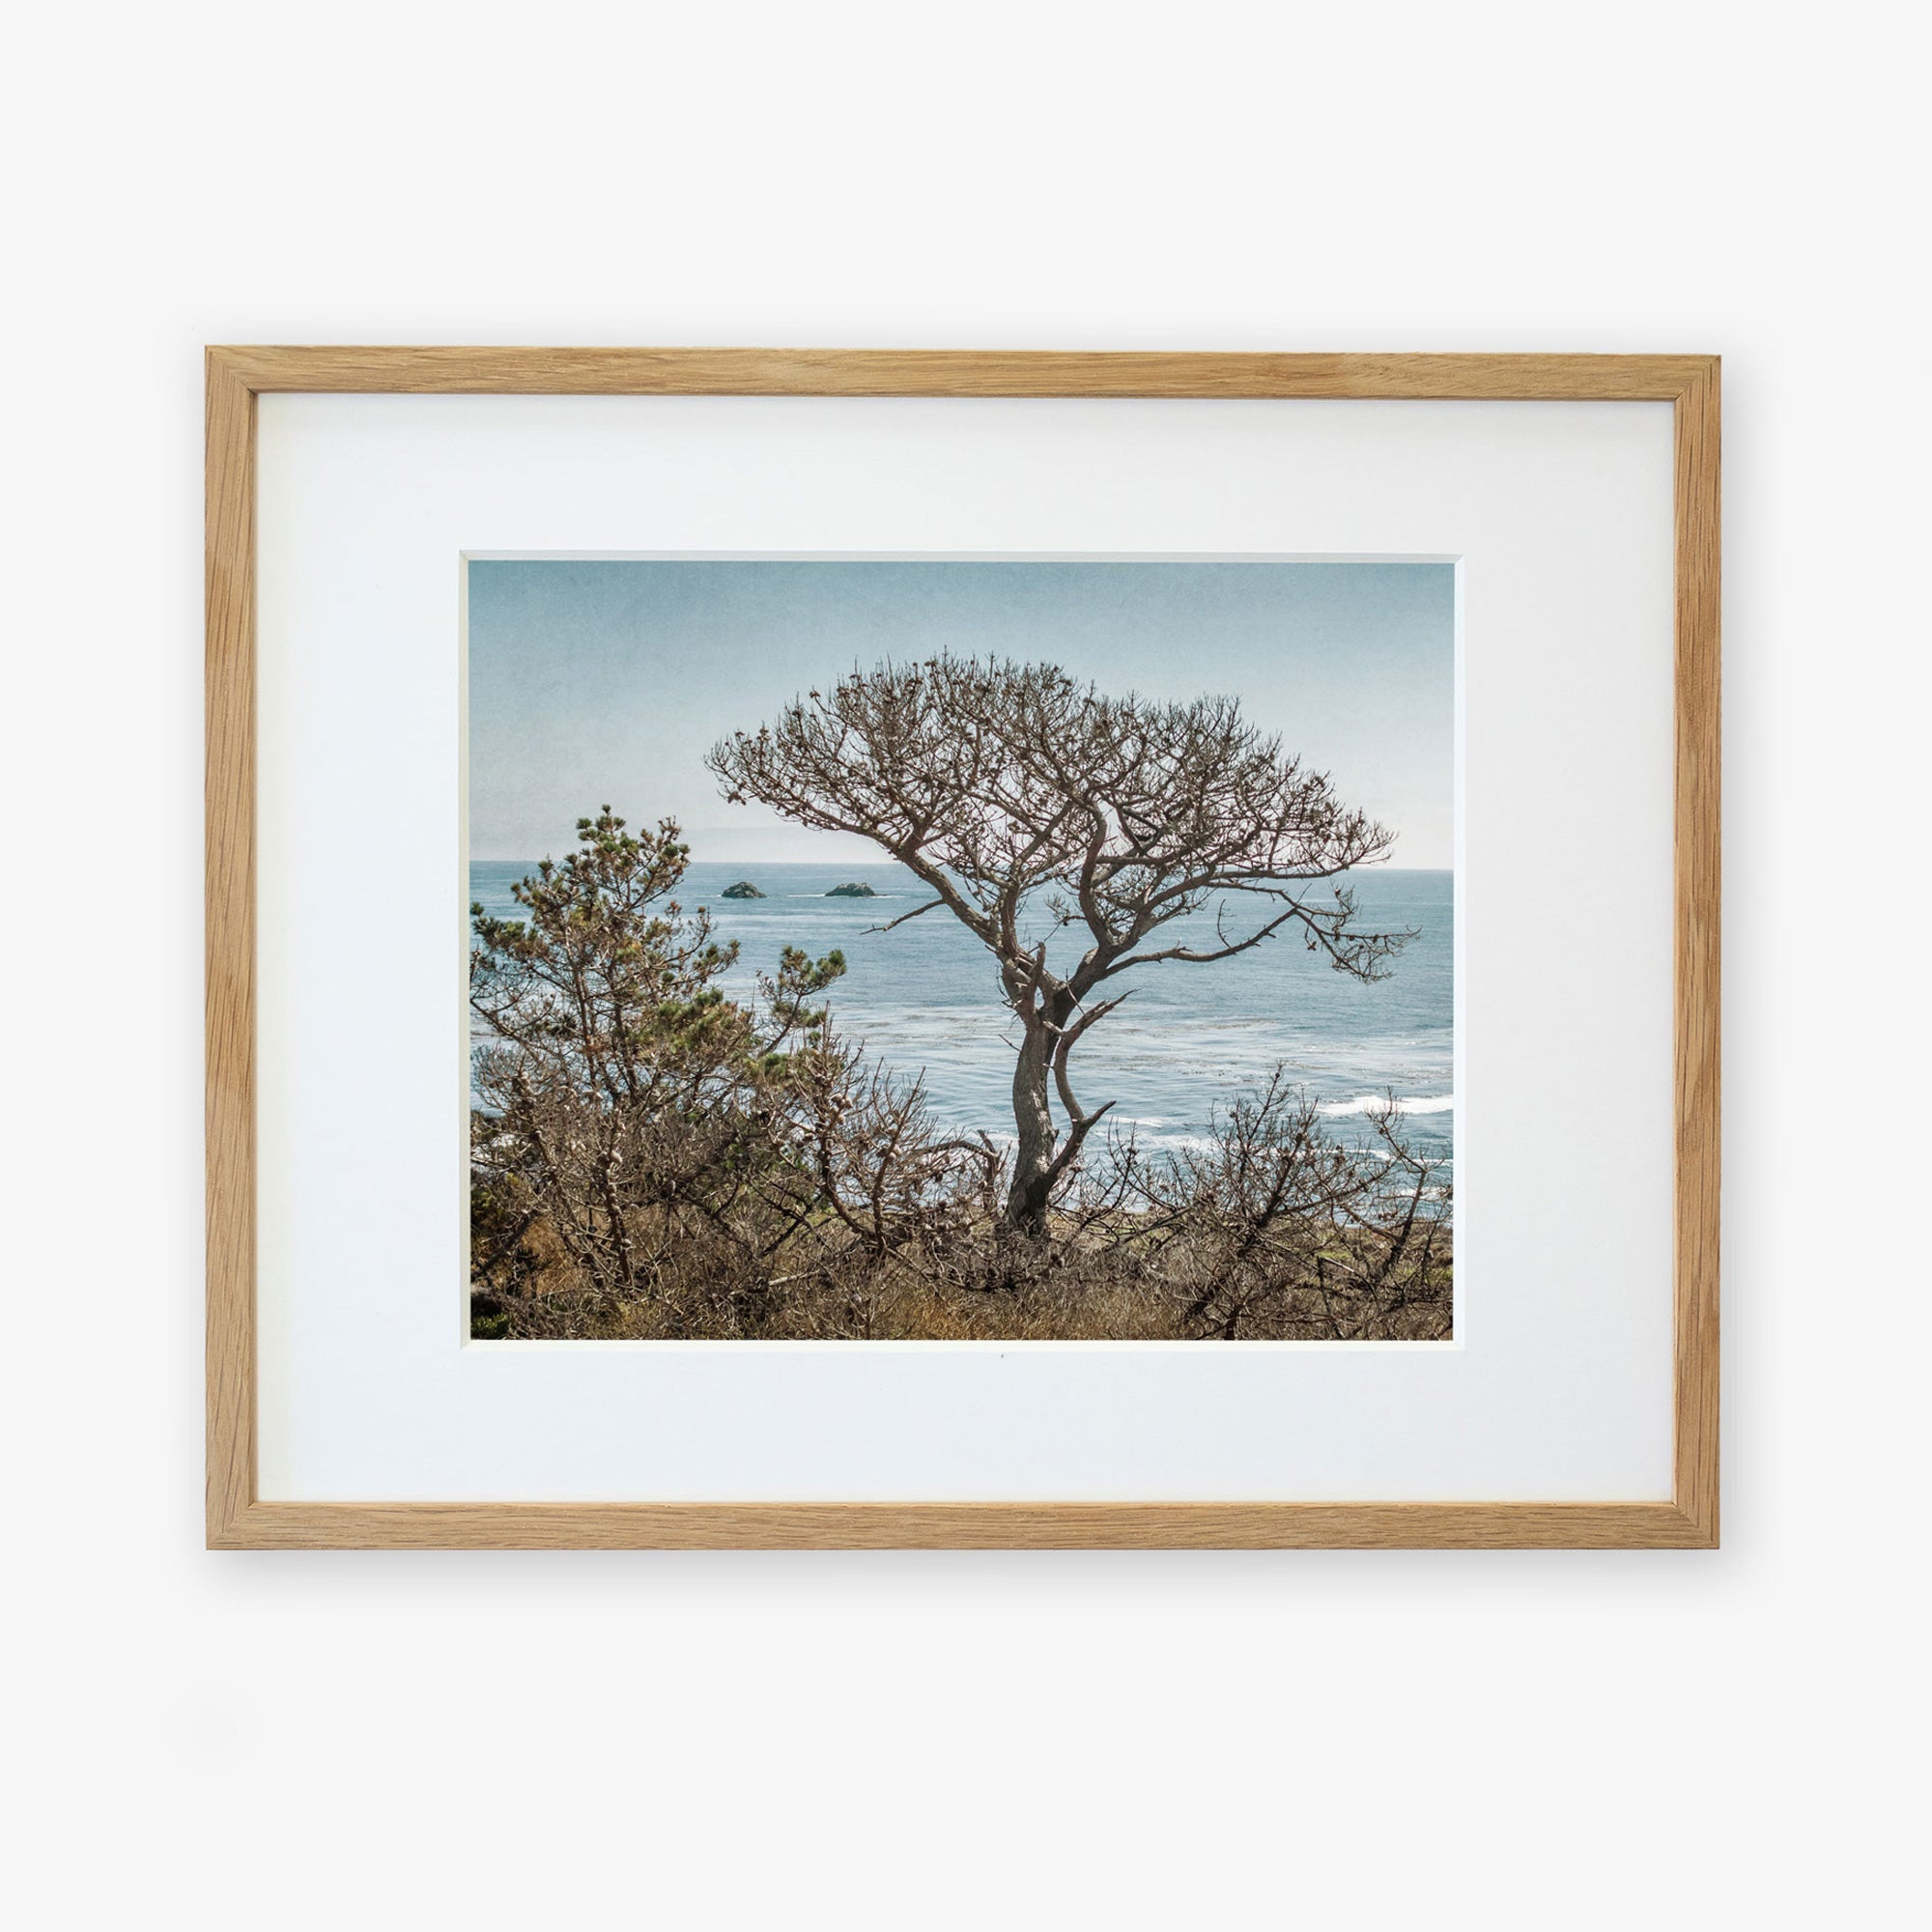 An unframed photograph of a solitary tree with a sprawling canopy, overlooking a serene ocean with distant islands, printed on archival photographic paper against a white background from Offley Green&#39;s California Landscape Art in Big Sur, &#39;Wind Blown Tree&#39;.